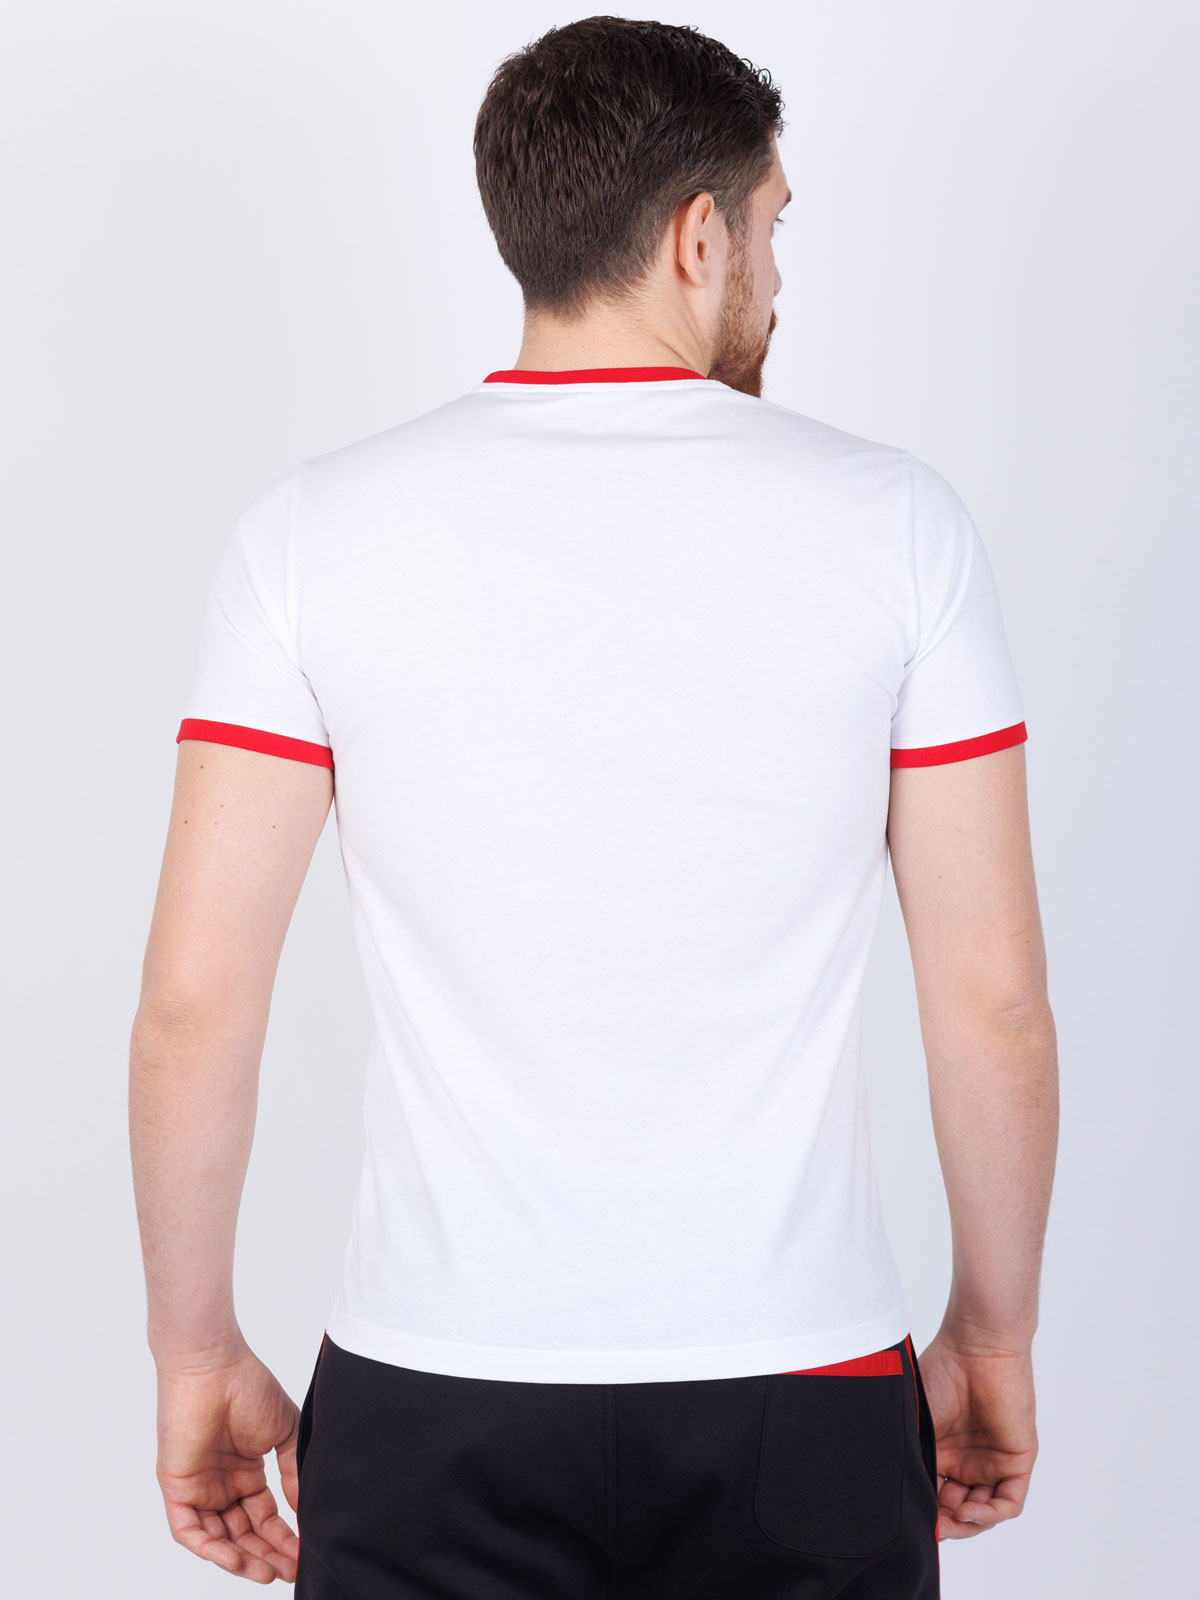 White tshirt with red print - 96456 € 23.62 img3